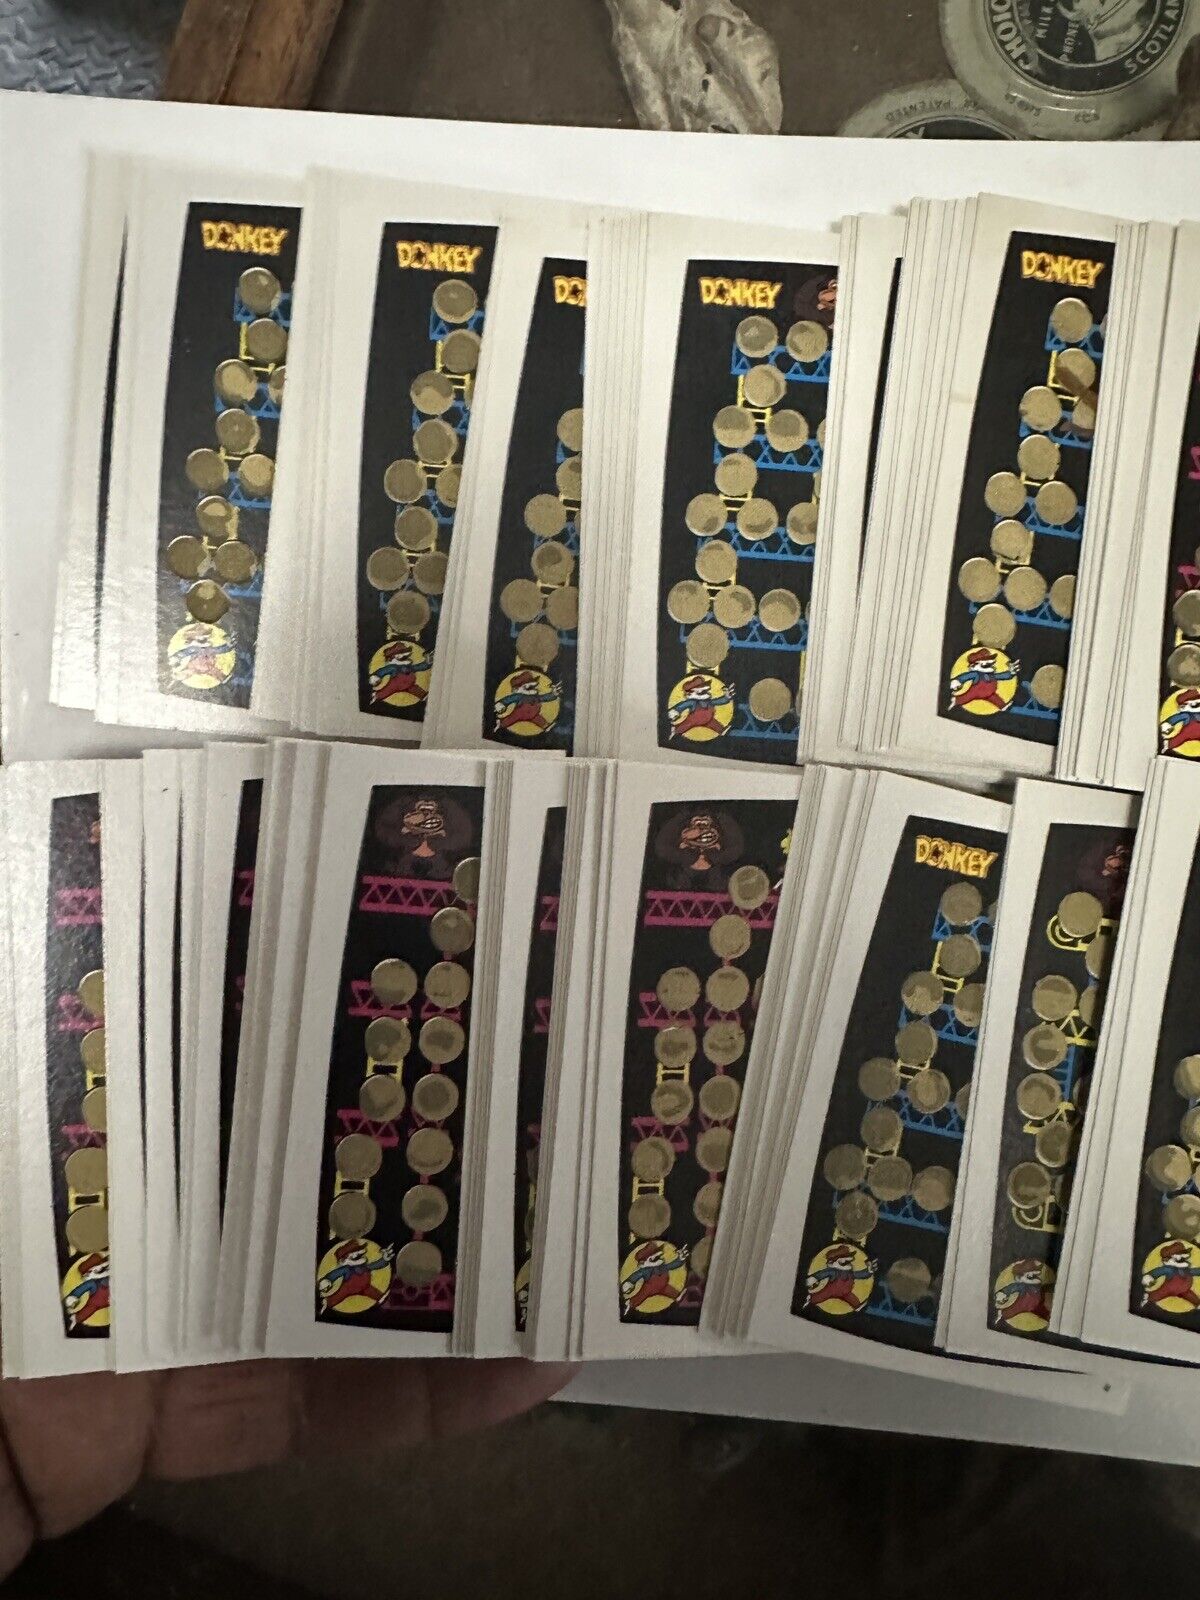 1982 DONKEY KONG Nintendo 100 Scratch OFF VIDEO GAME CARDS Nmt Unscratched TOPPS